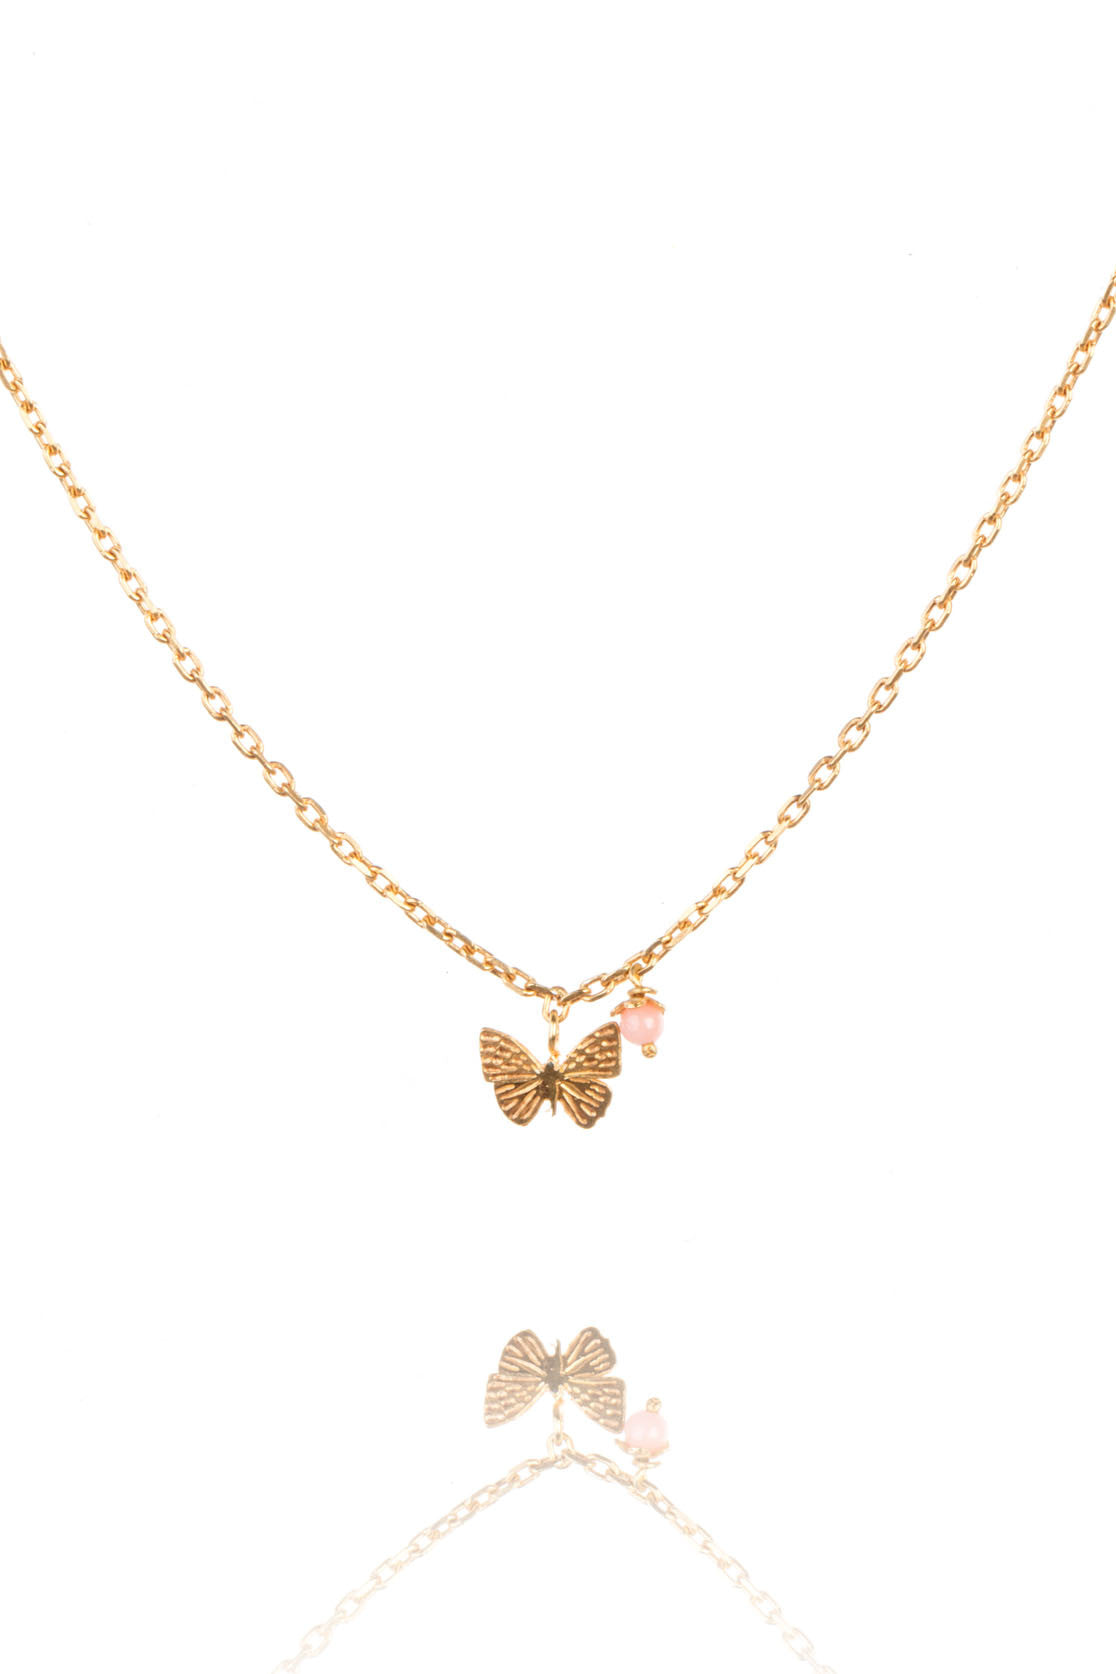 Sterling Silver or Gold Tiny Butterfly Necklace With Pink Flower